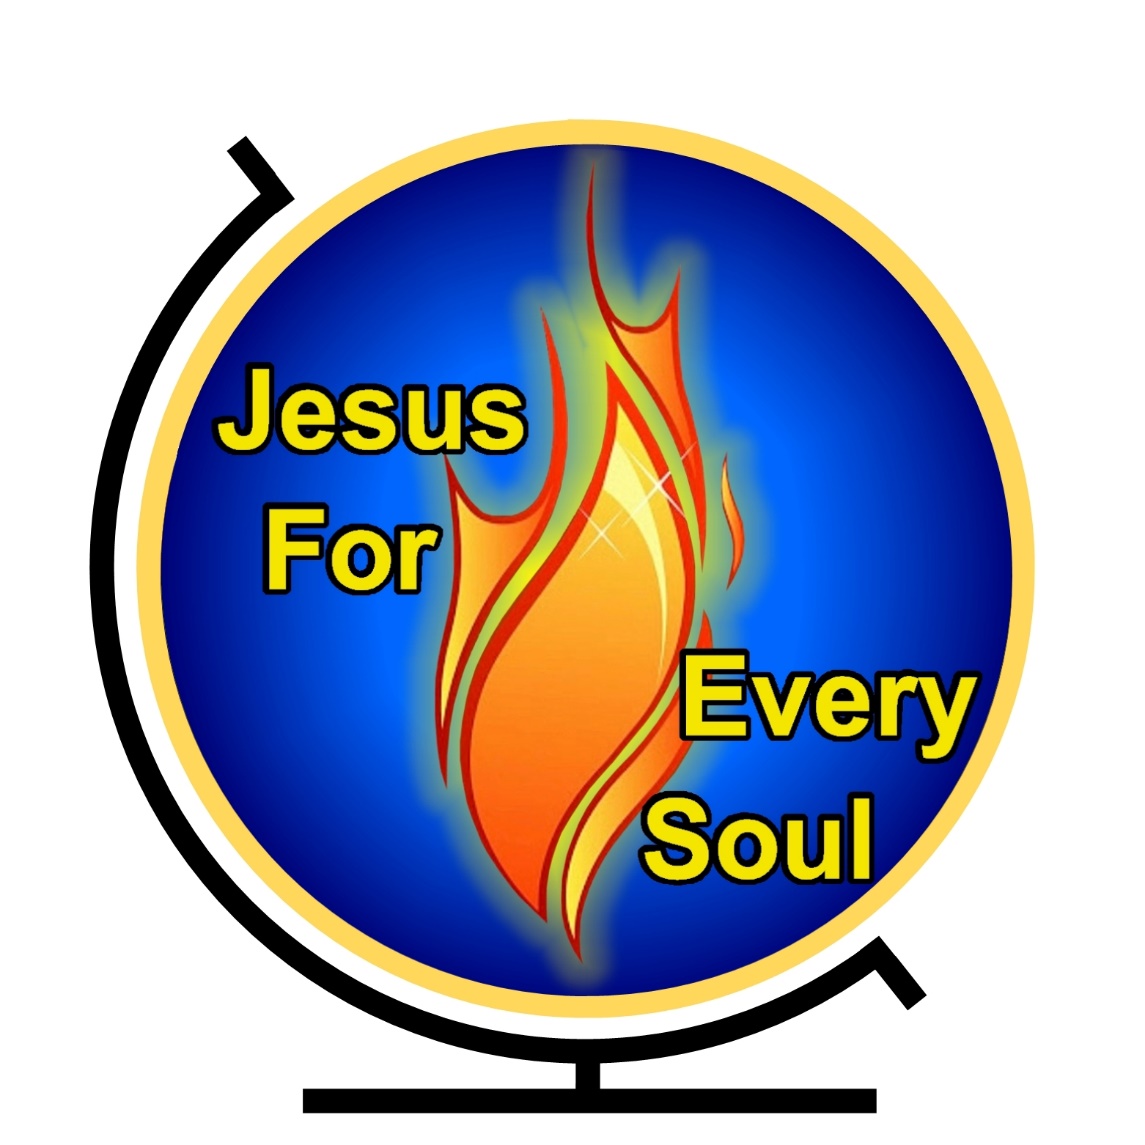 Jesus for every soul